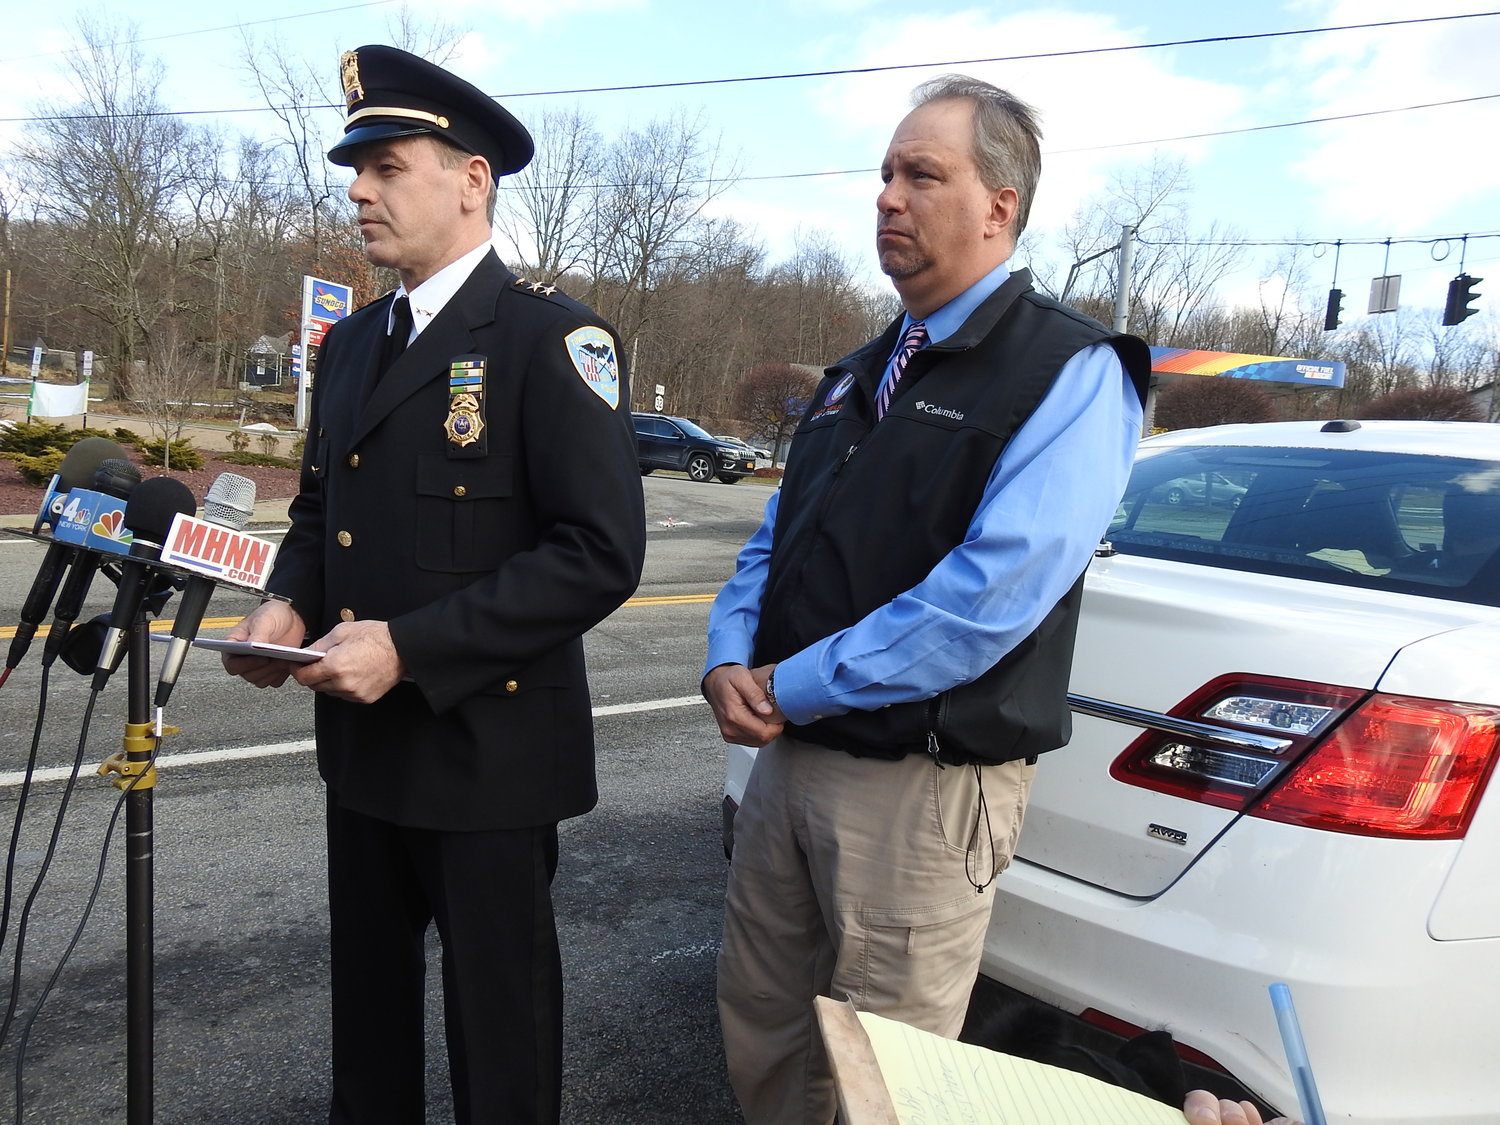 Town of Newburgh Police Chief Donald Campbell addressing the media, Sunday, near the intersection on Route 300 and 32 in the Town of Newburgh